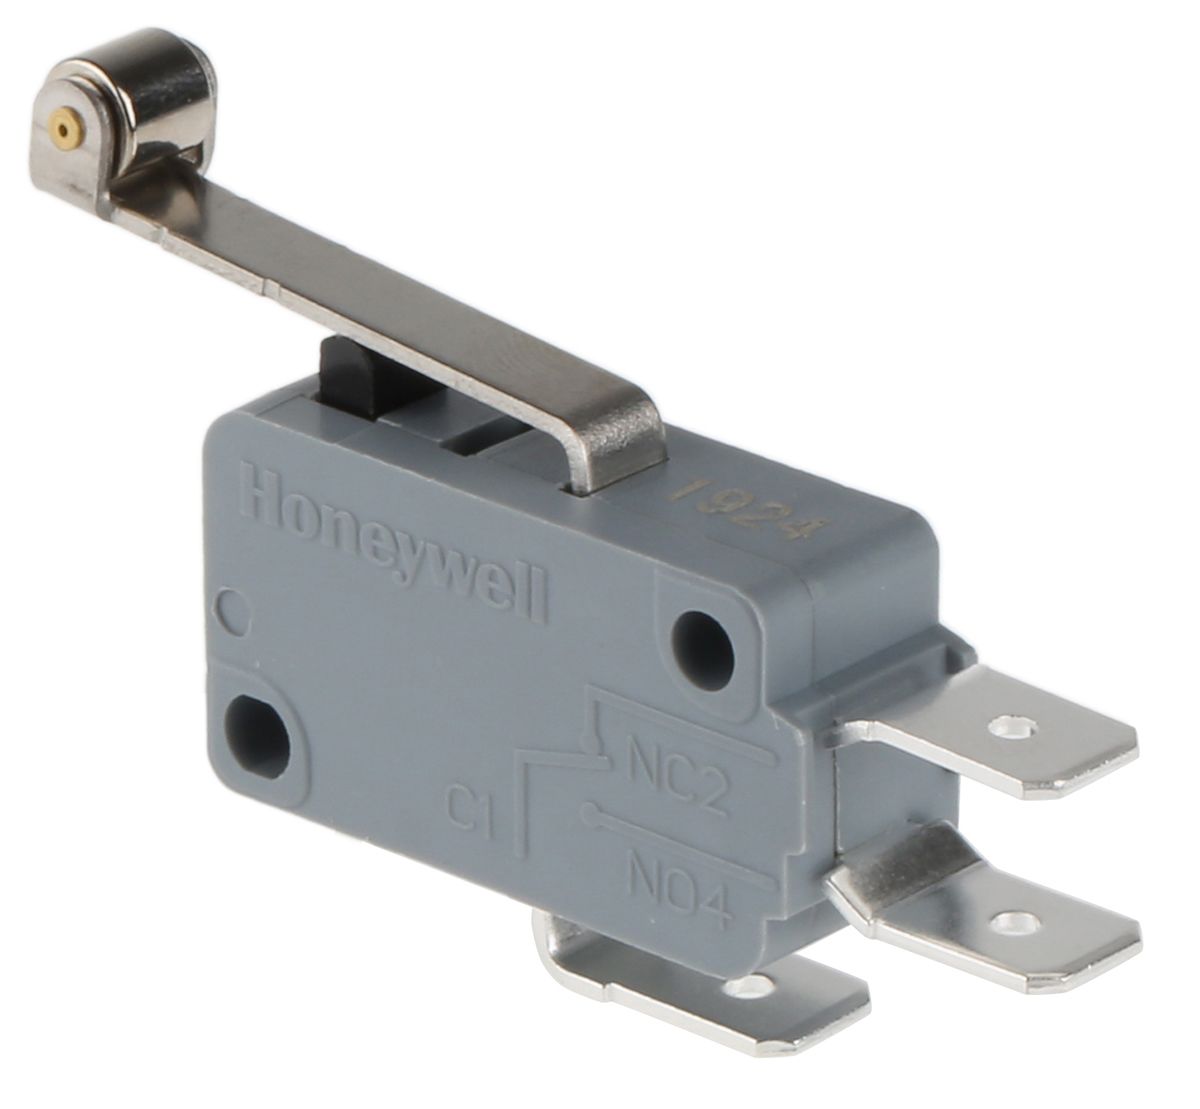 Honeywell Roller Lever Micro Switch, Tab Terminal, 16 A @ 250 V ac, SP-CO